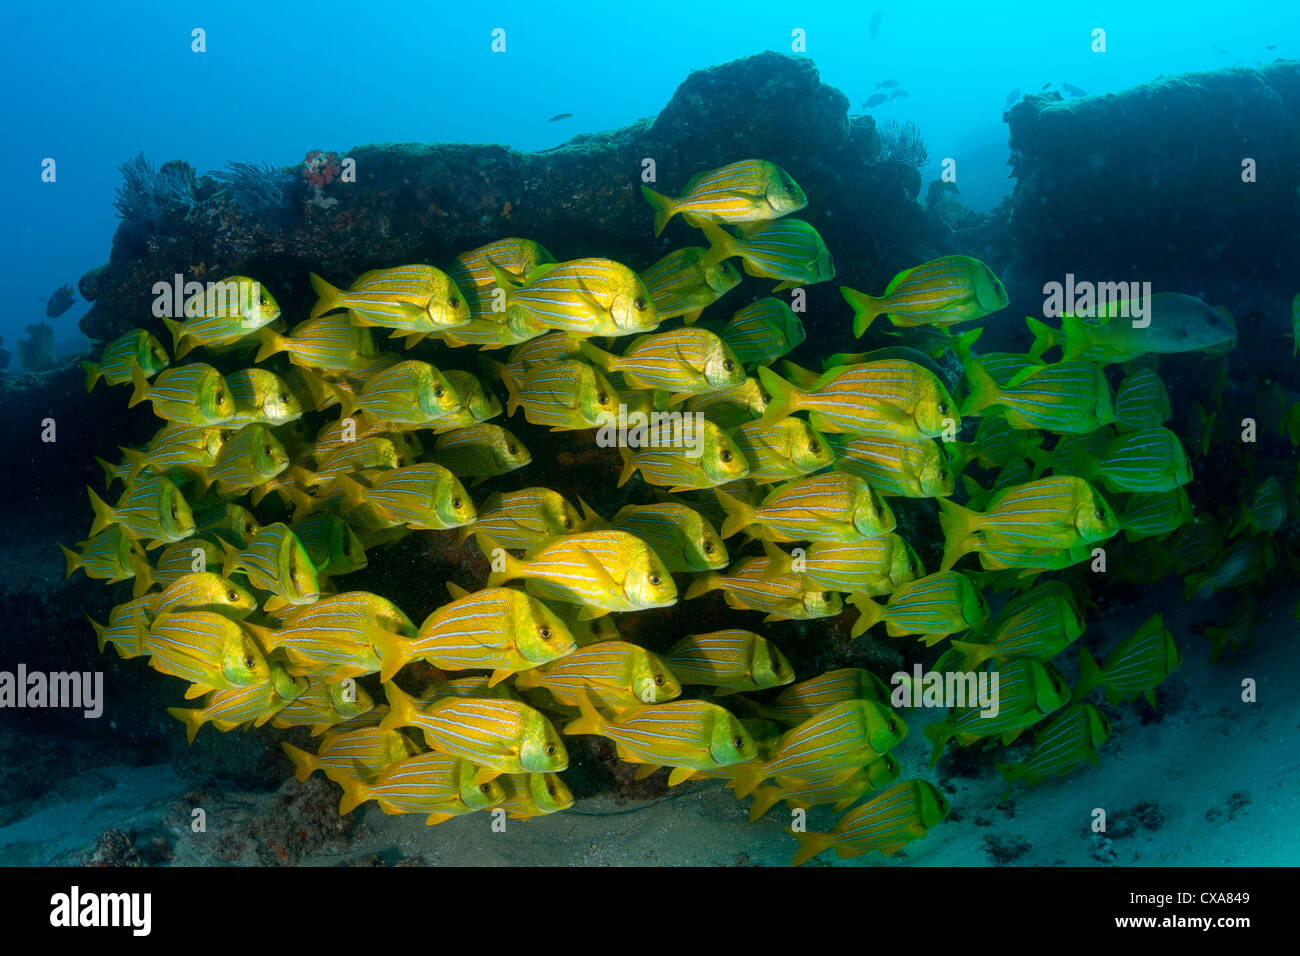 A school of tropical fish at Cabo Pulmo National Marine Park, Mexico. Stock Photo